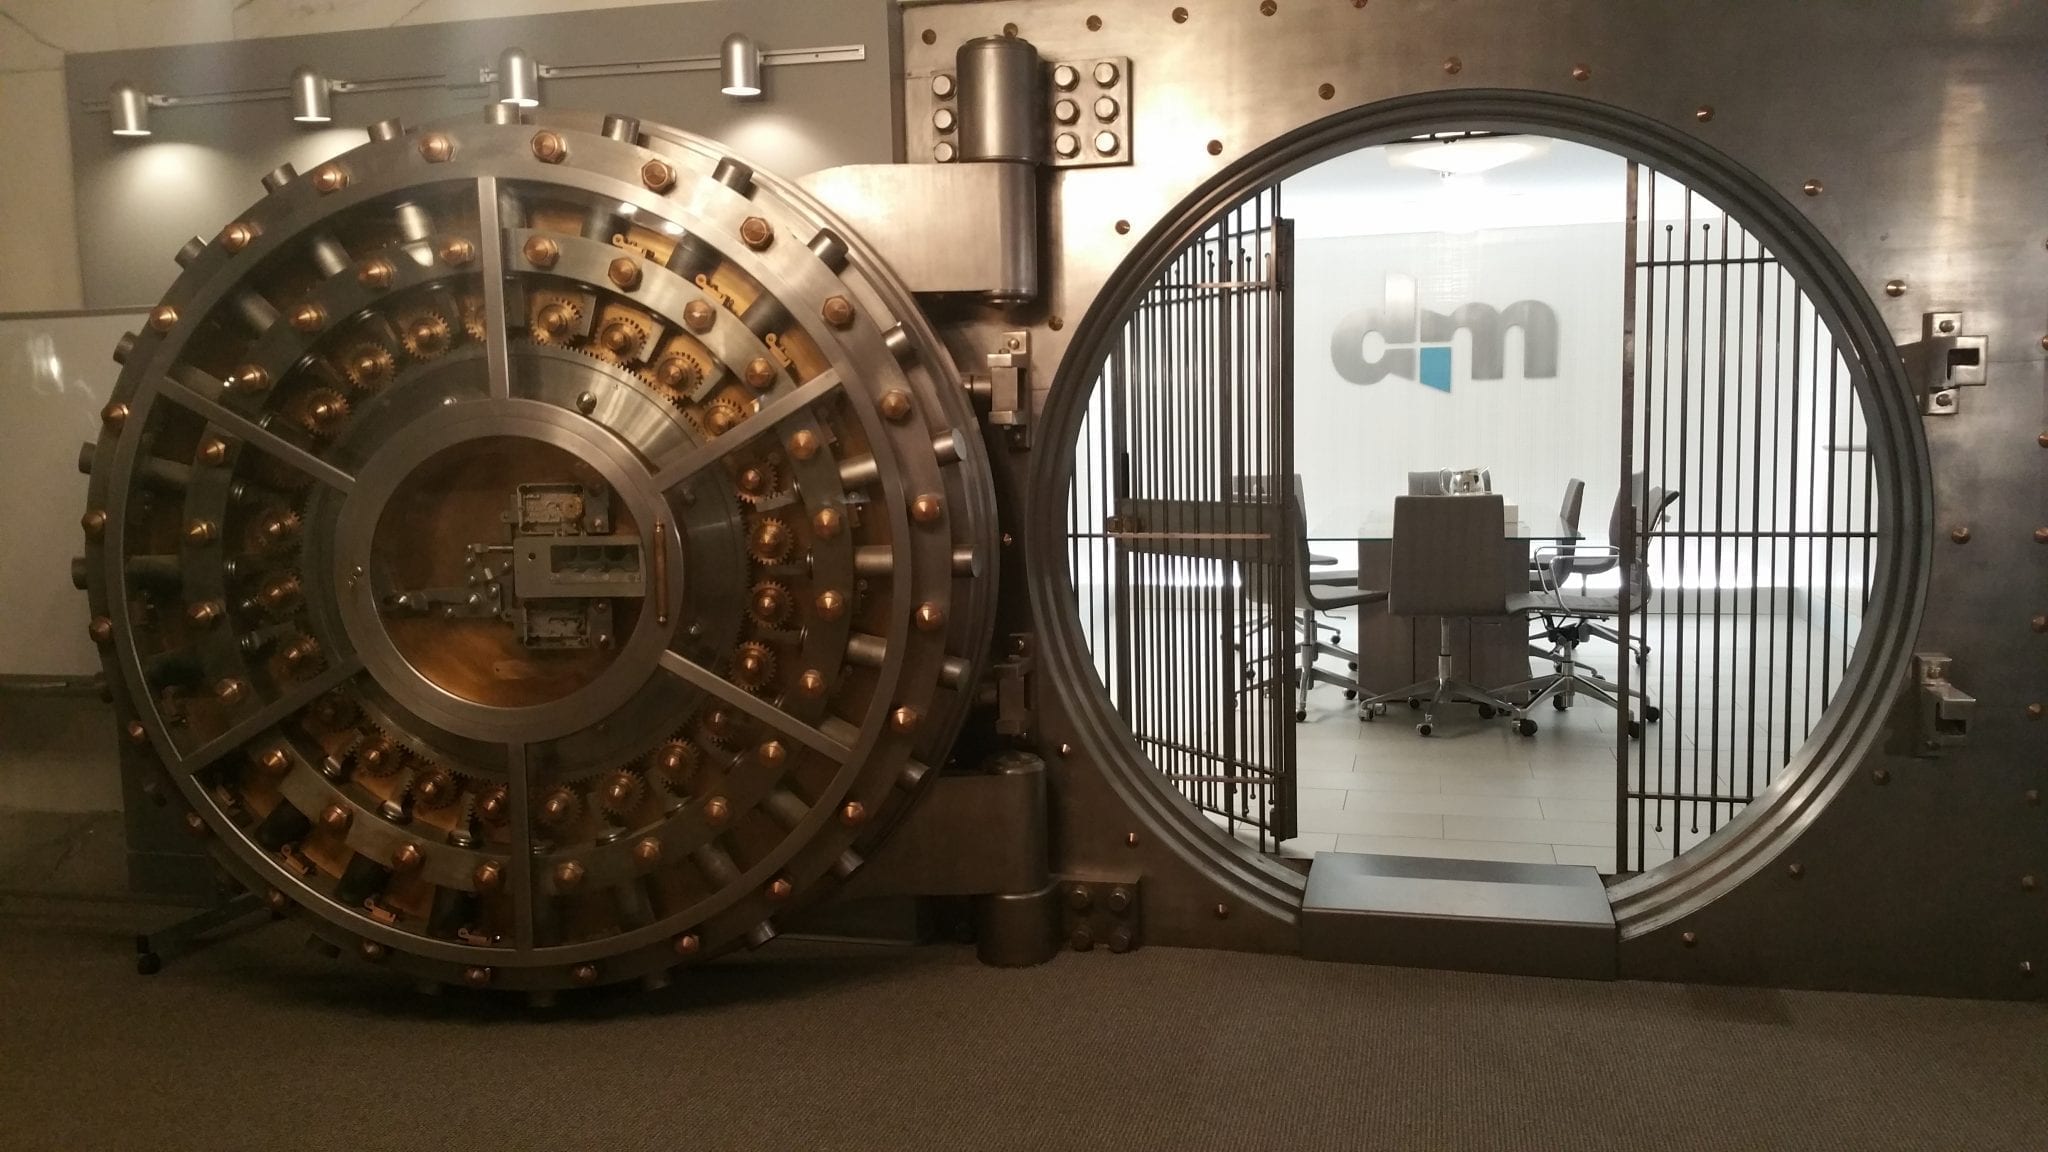 Open vault with conference table and chairs inside; image via Pxhere, CC0.